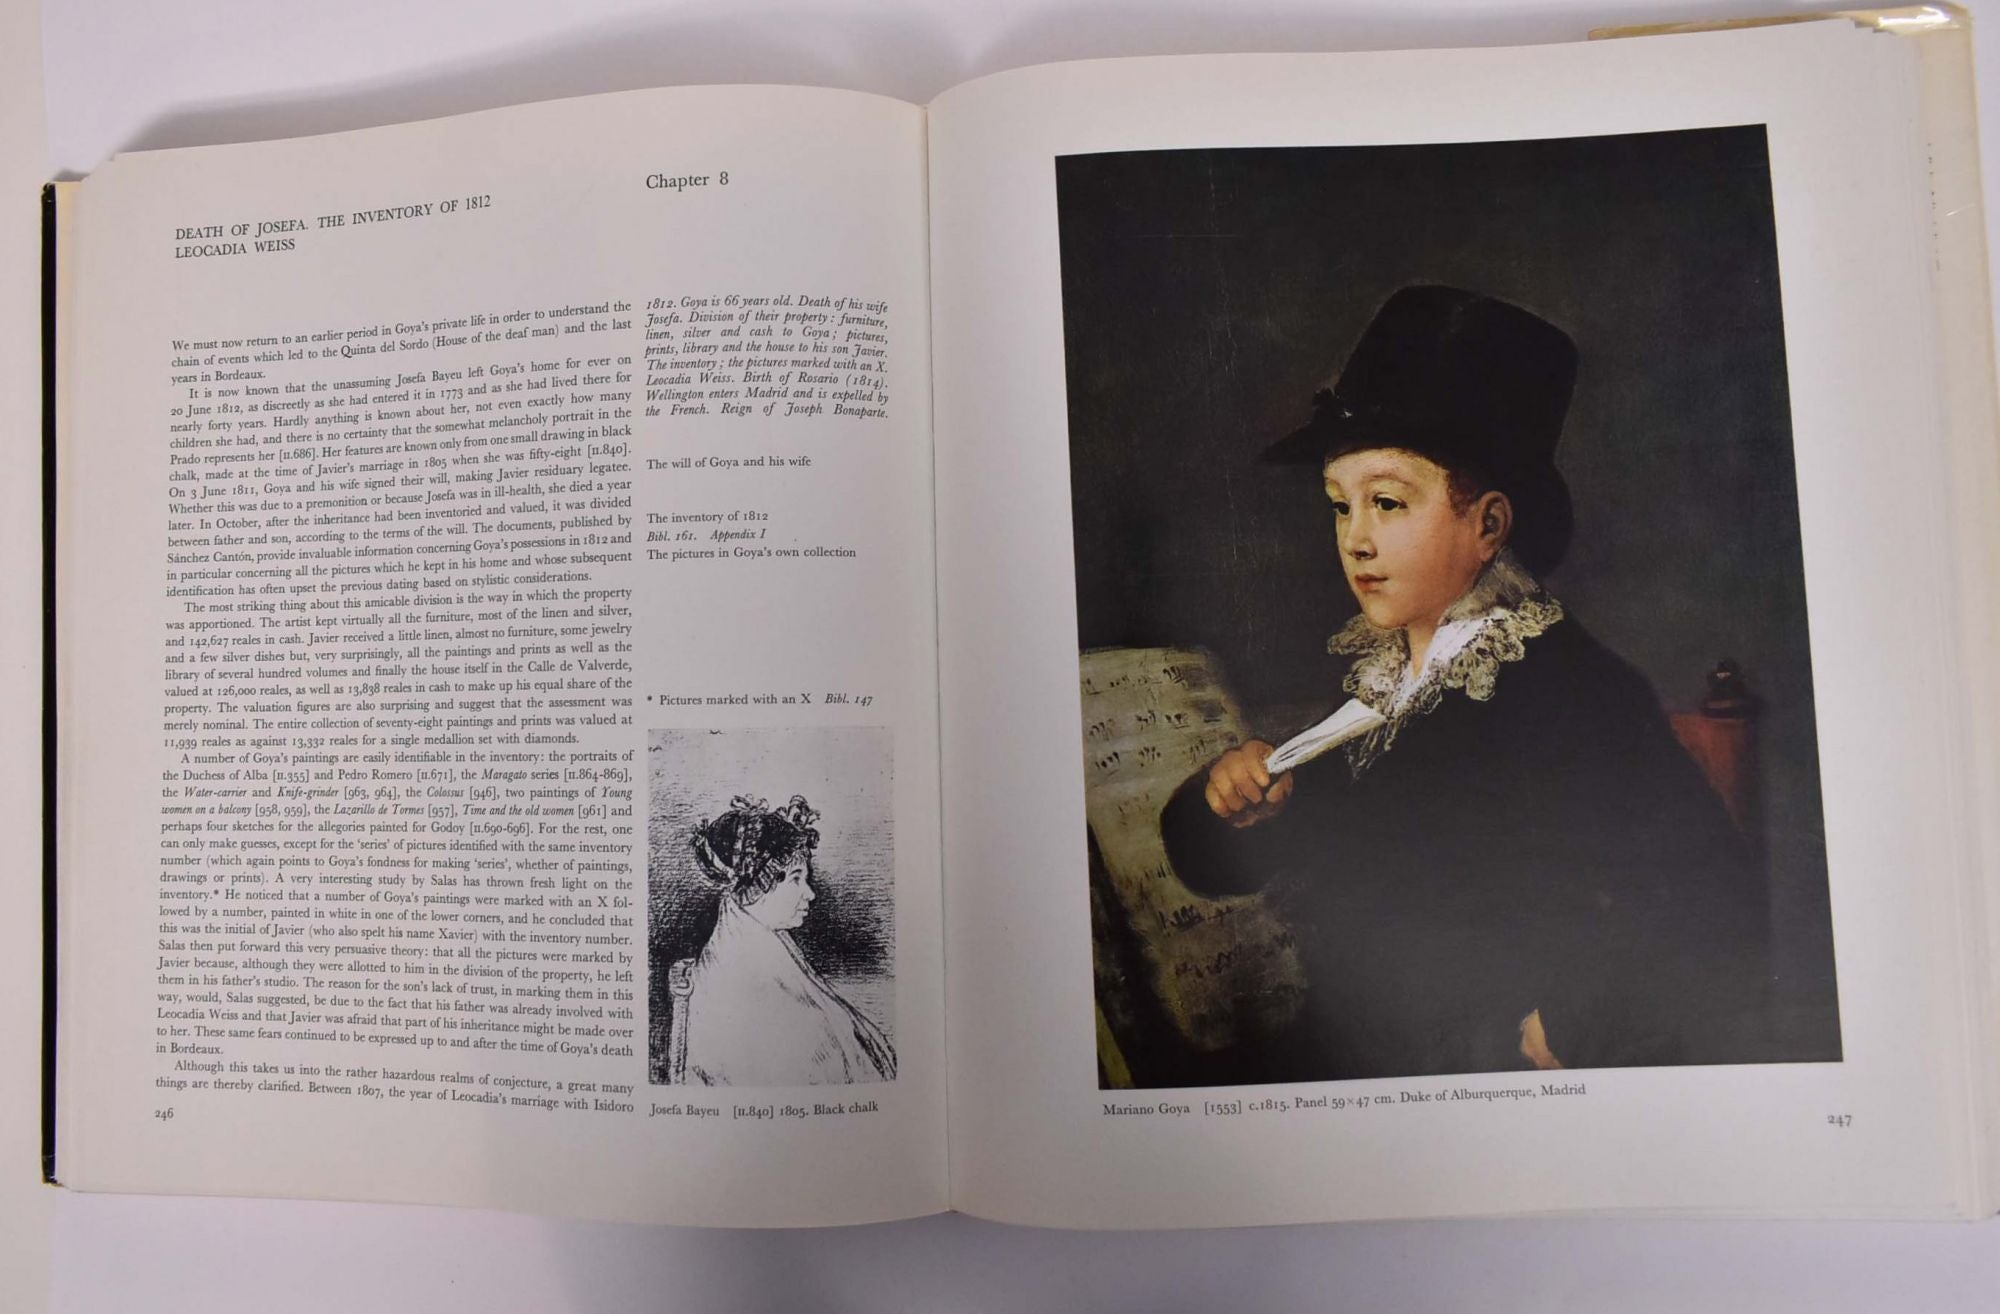 The Life and Complete Work of Francisco Goya With a Catalogue Raisonné ...